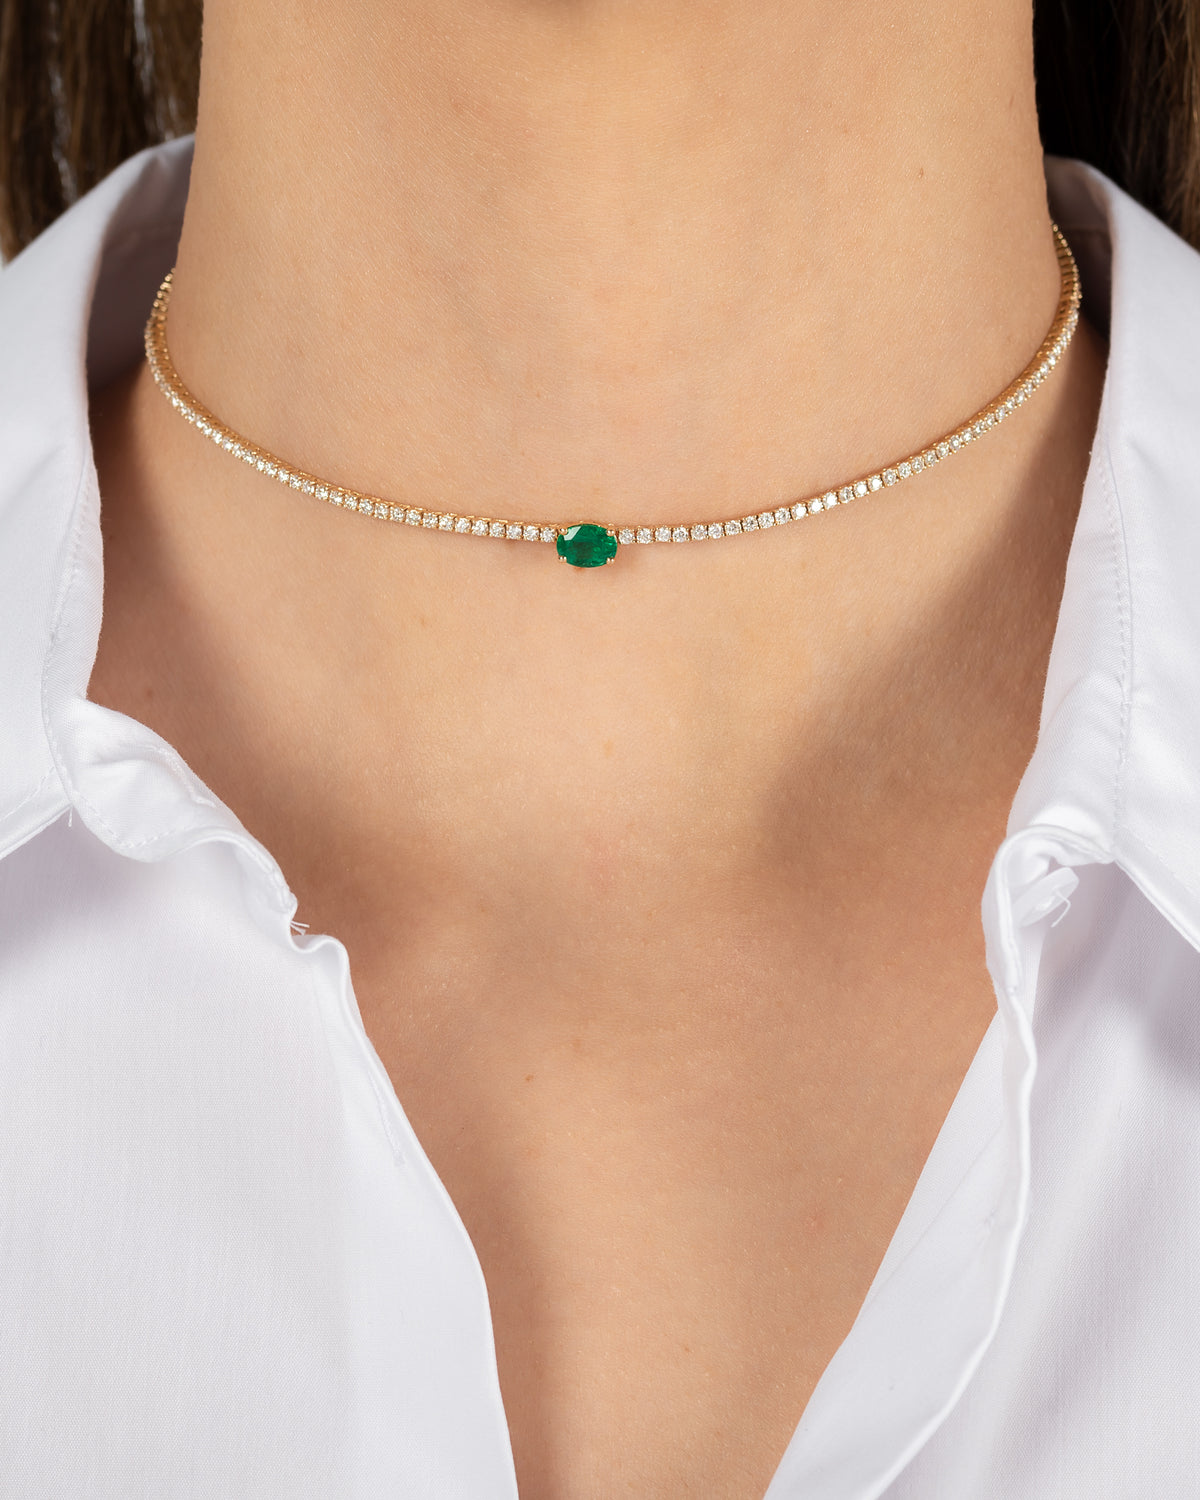 4 Prong Diamond Tennis Necklace with Oval Cut Emerald